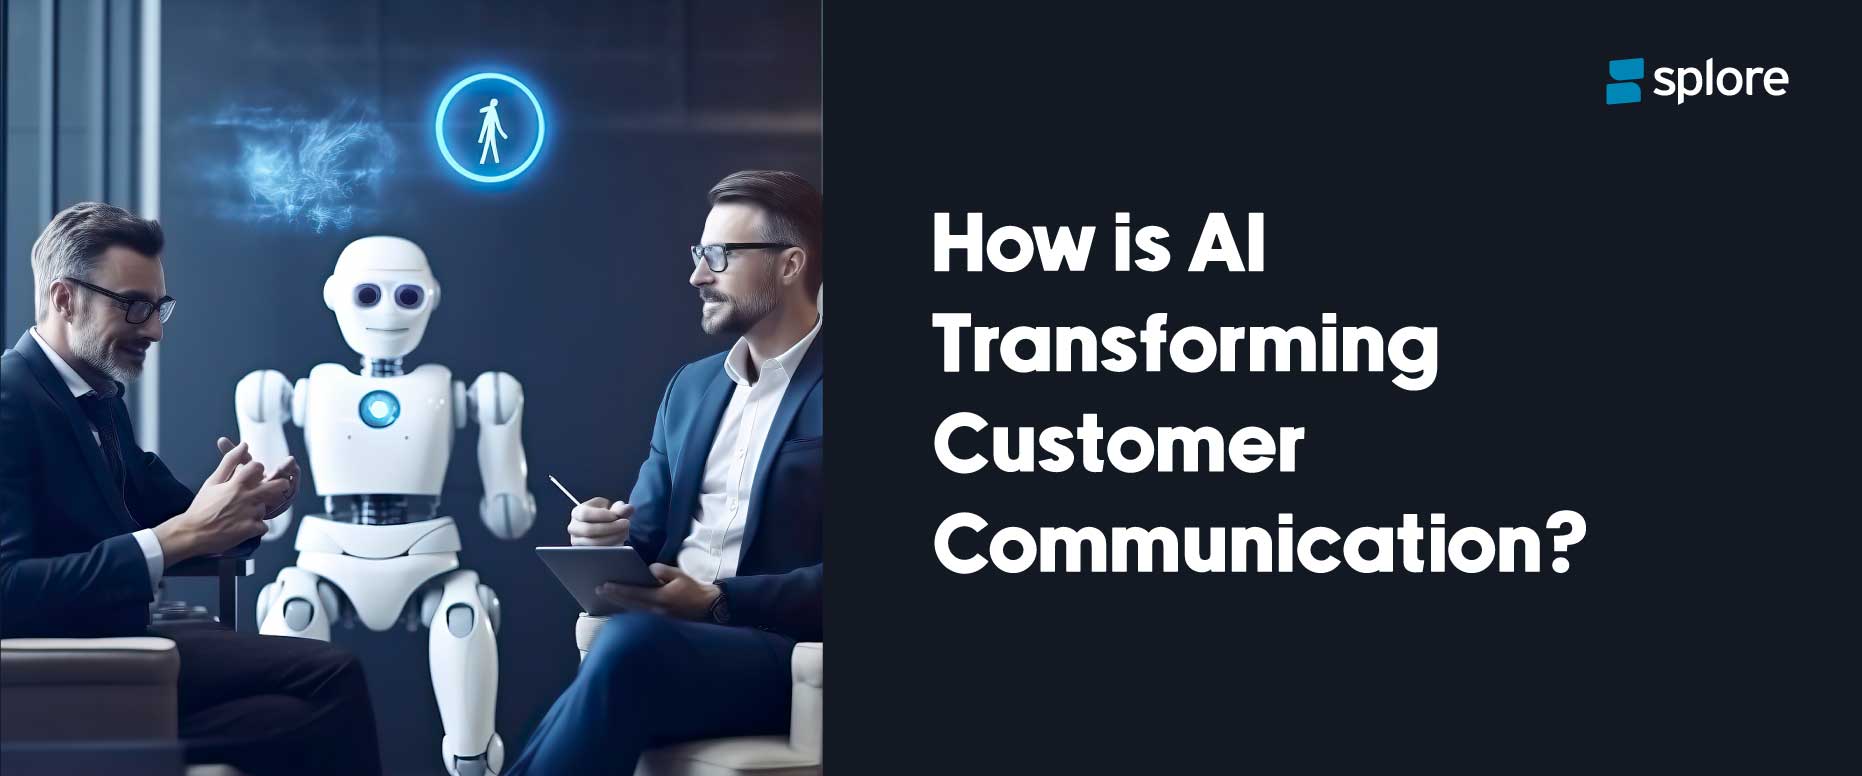 How is AI Transforming customer communication